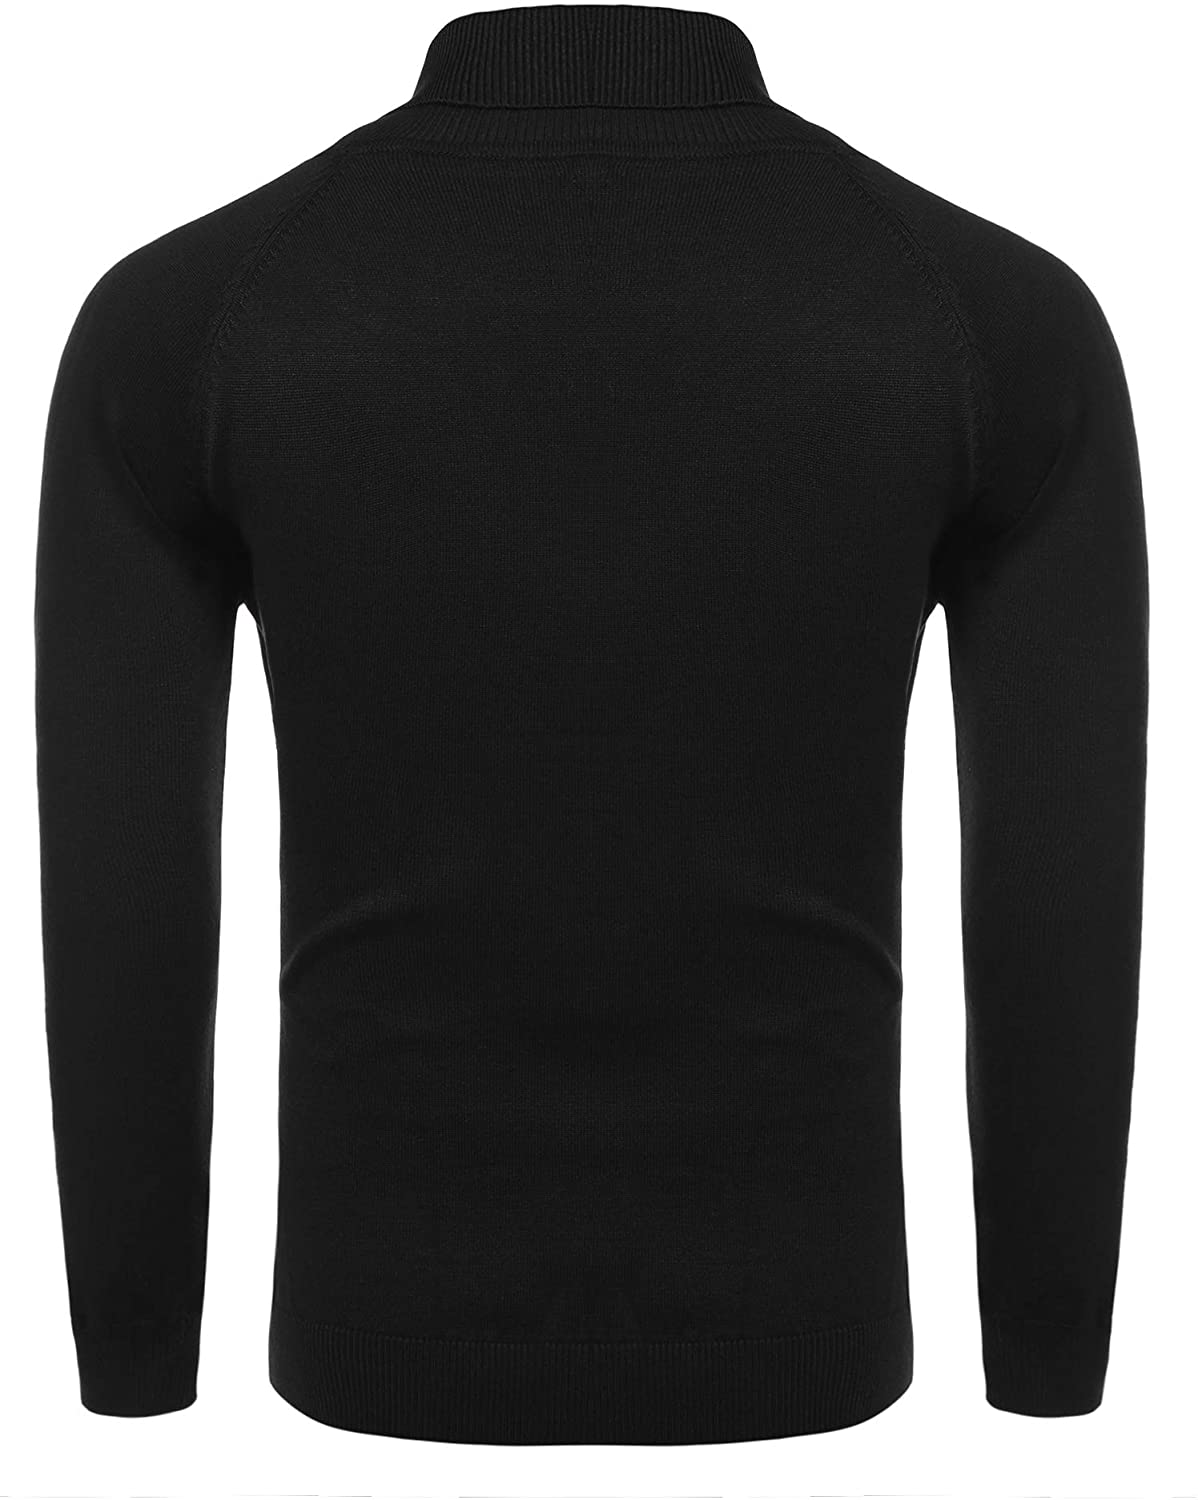 COOFANDY Men's Turtleneck Knit Casual Cable Ribbed Pullover High Neck ...